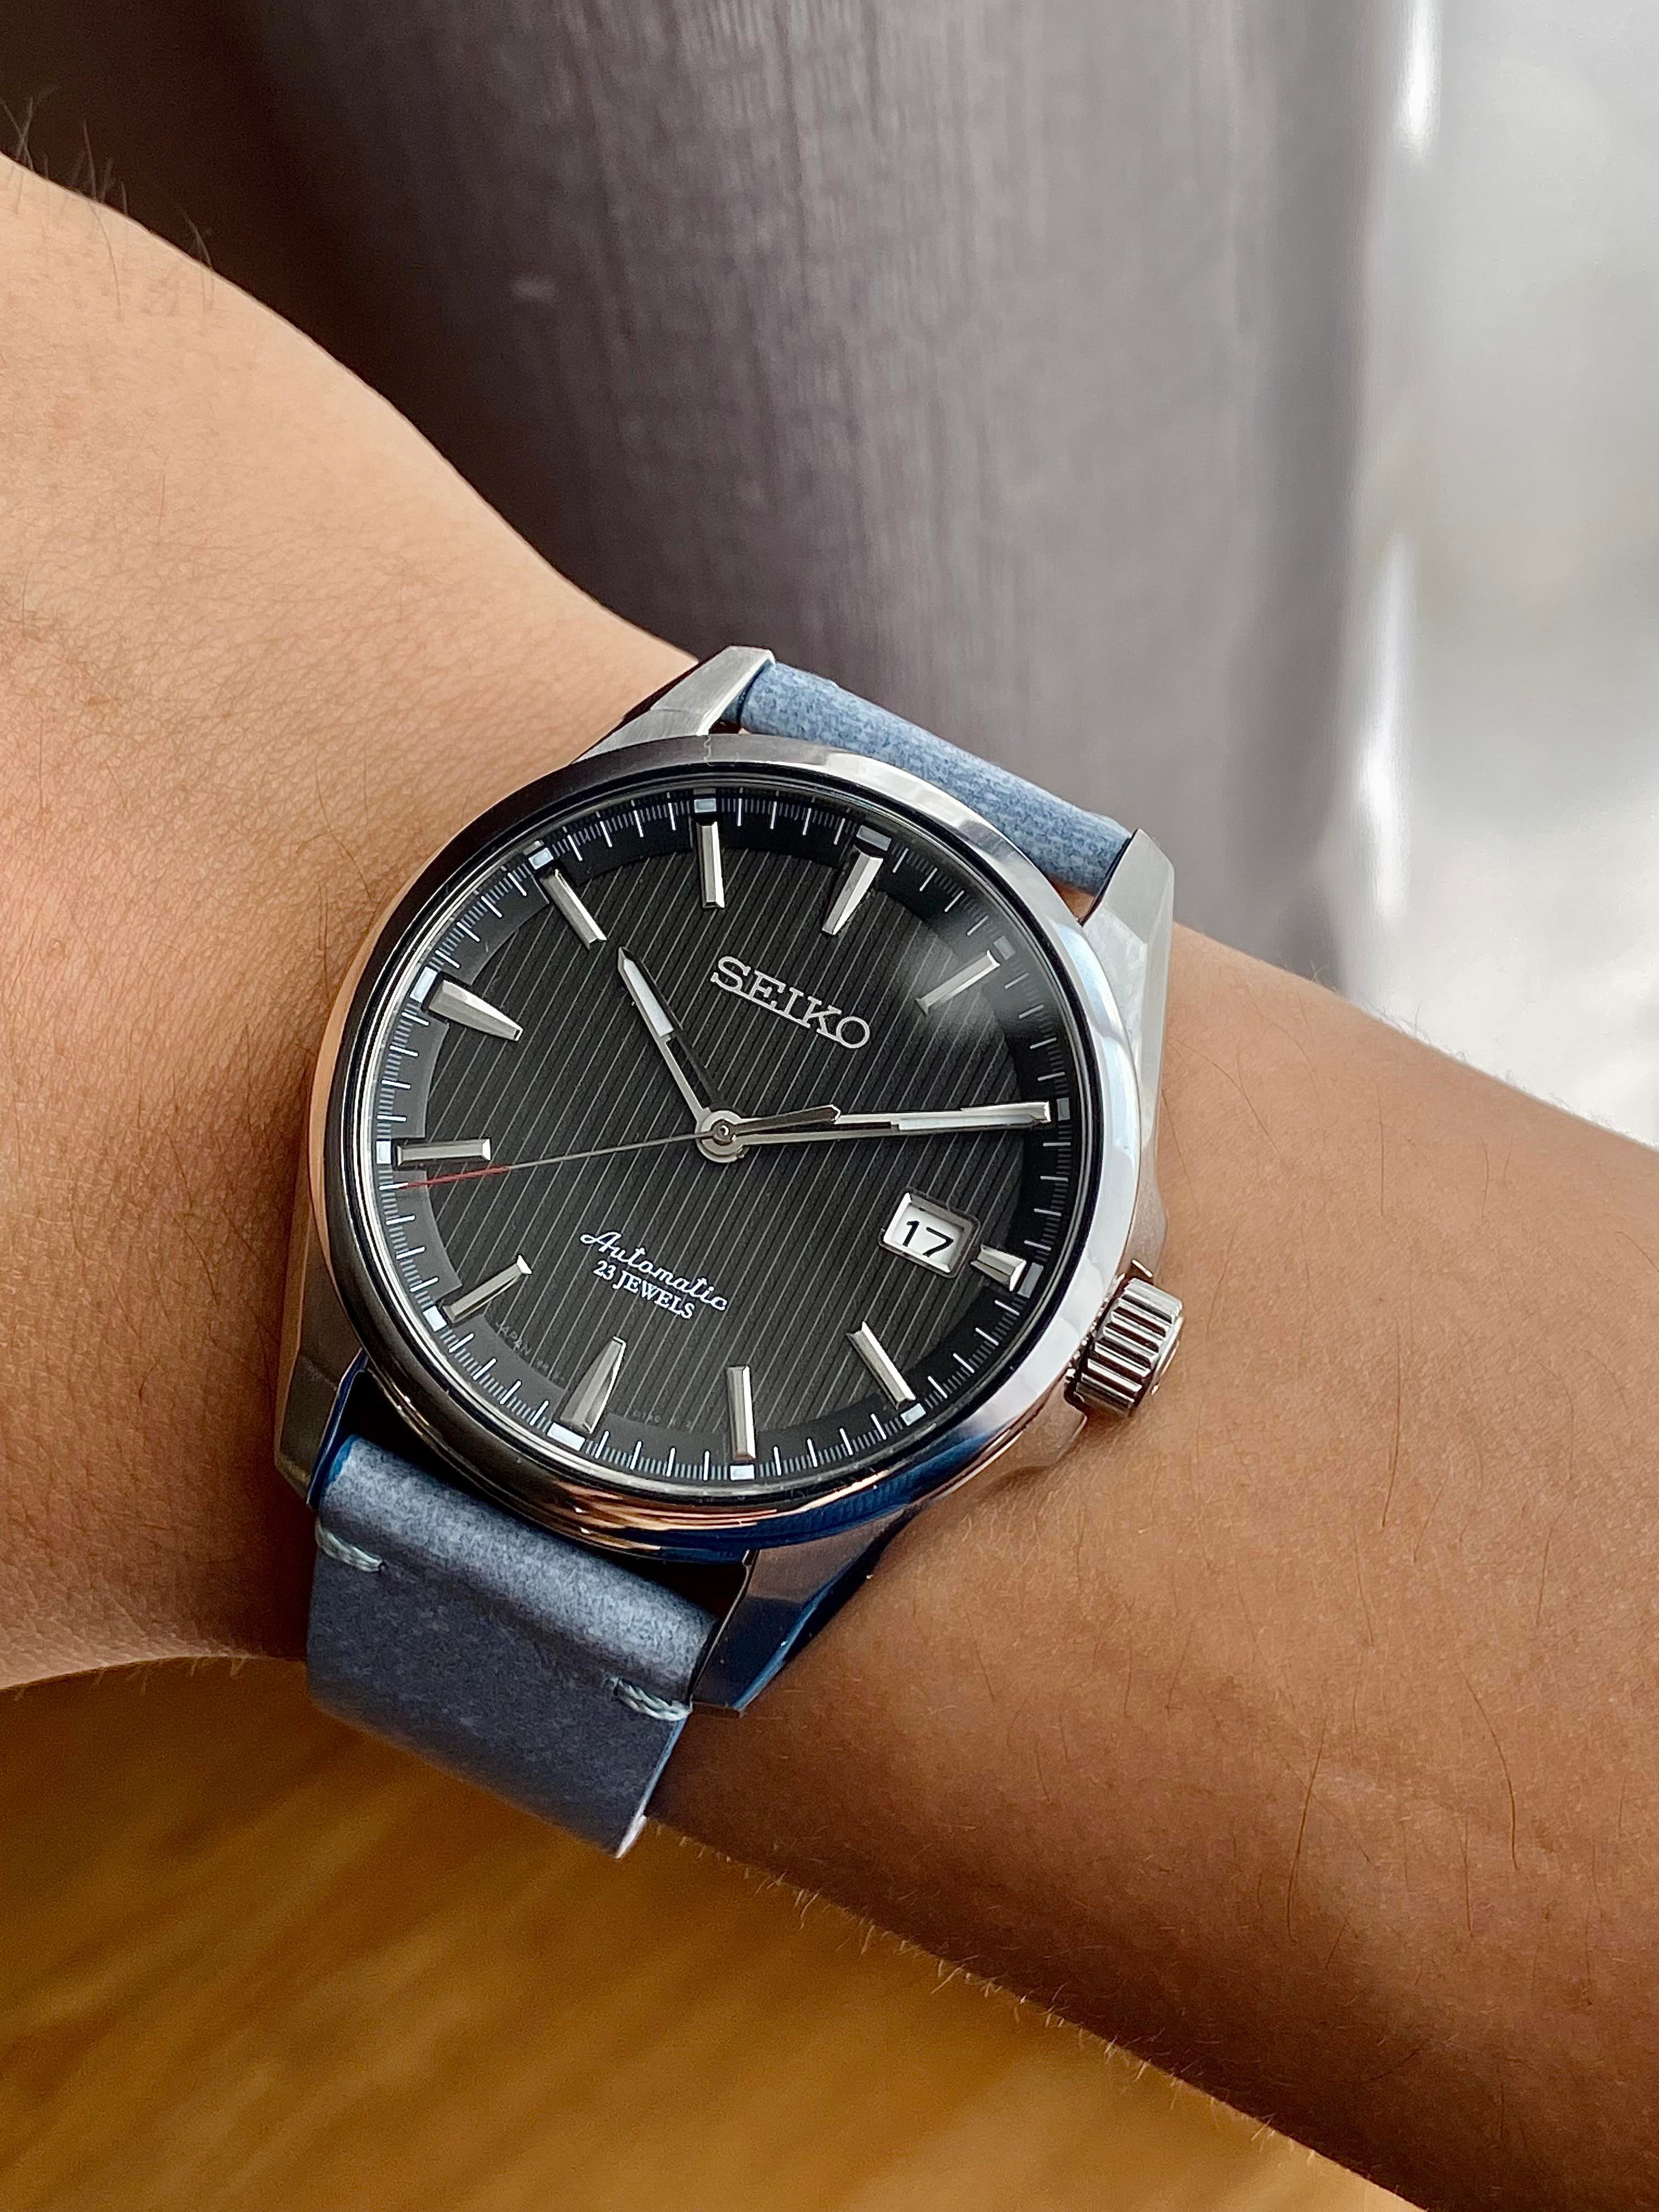 WTS] Seiko SARX017 [good condition with blue leather straps] | WatchCharts